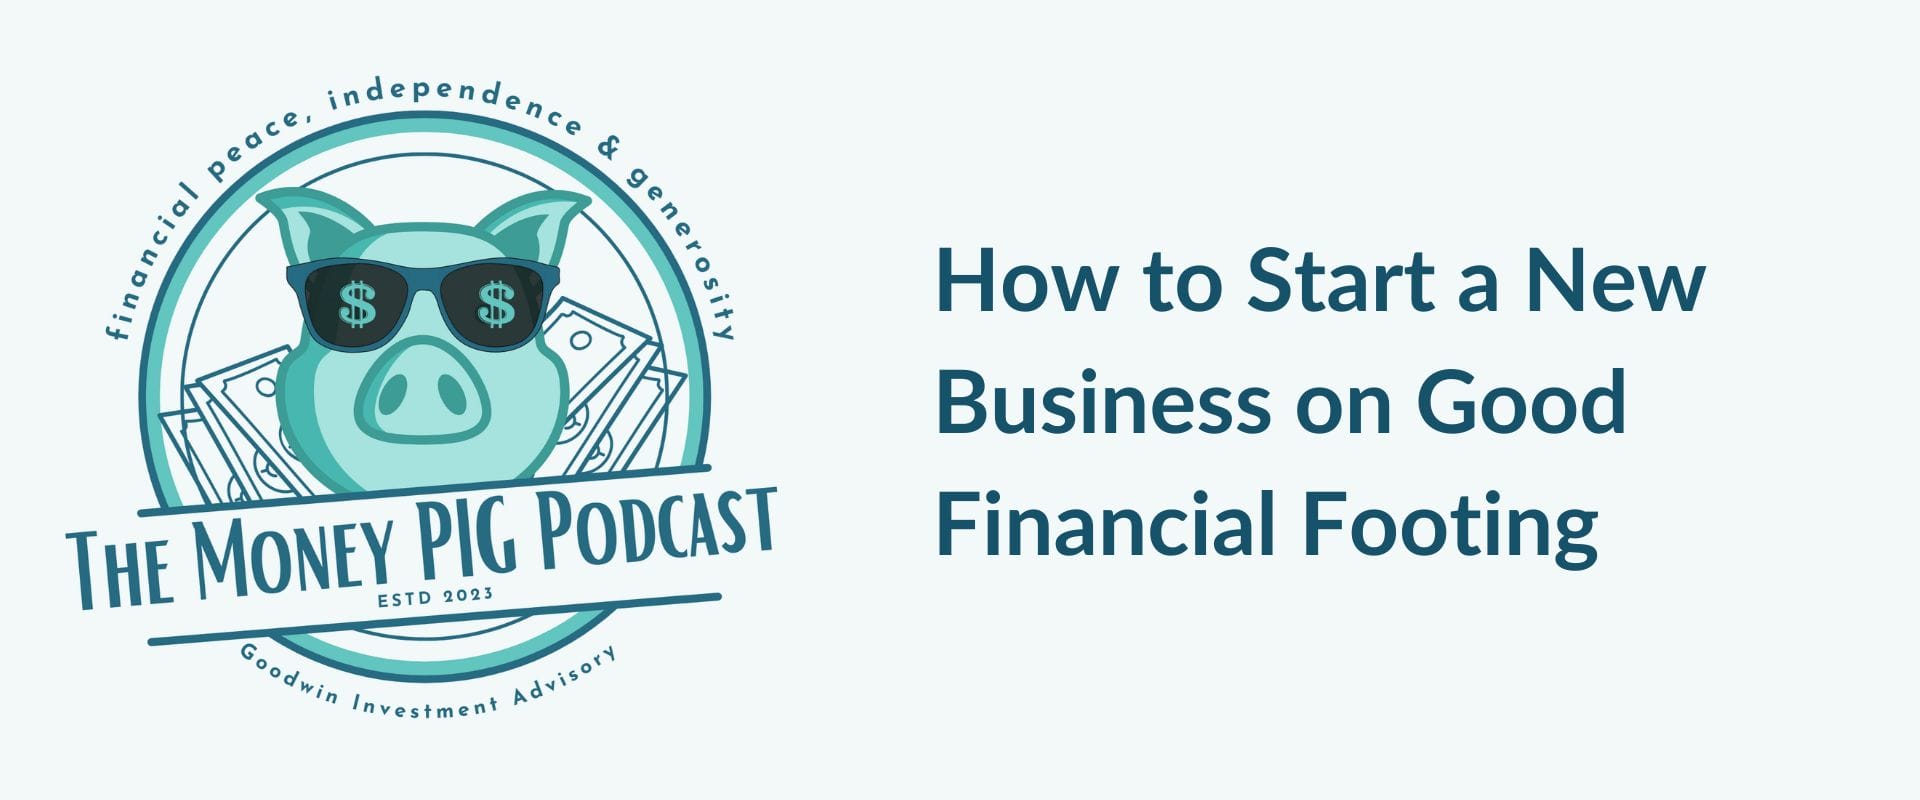 How to Start a New Business on Good Financial Footing